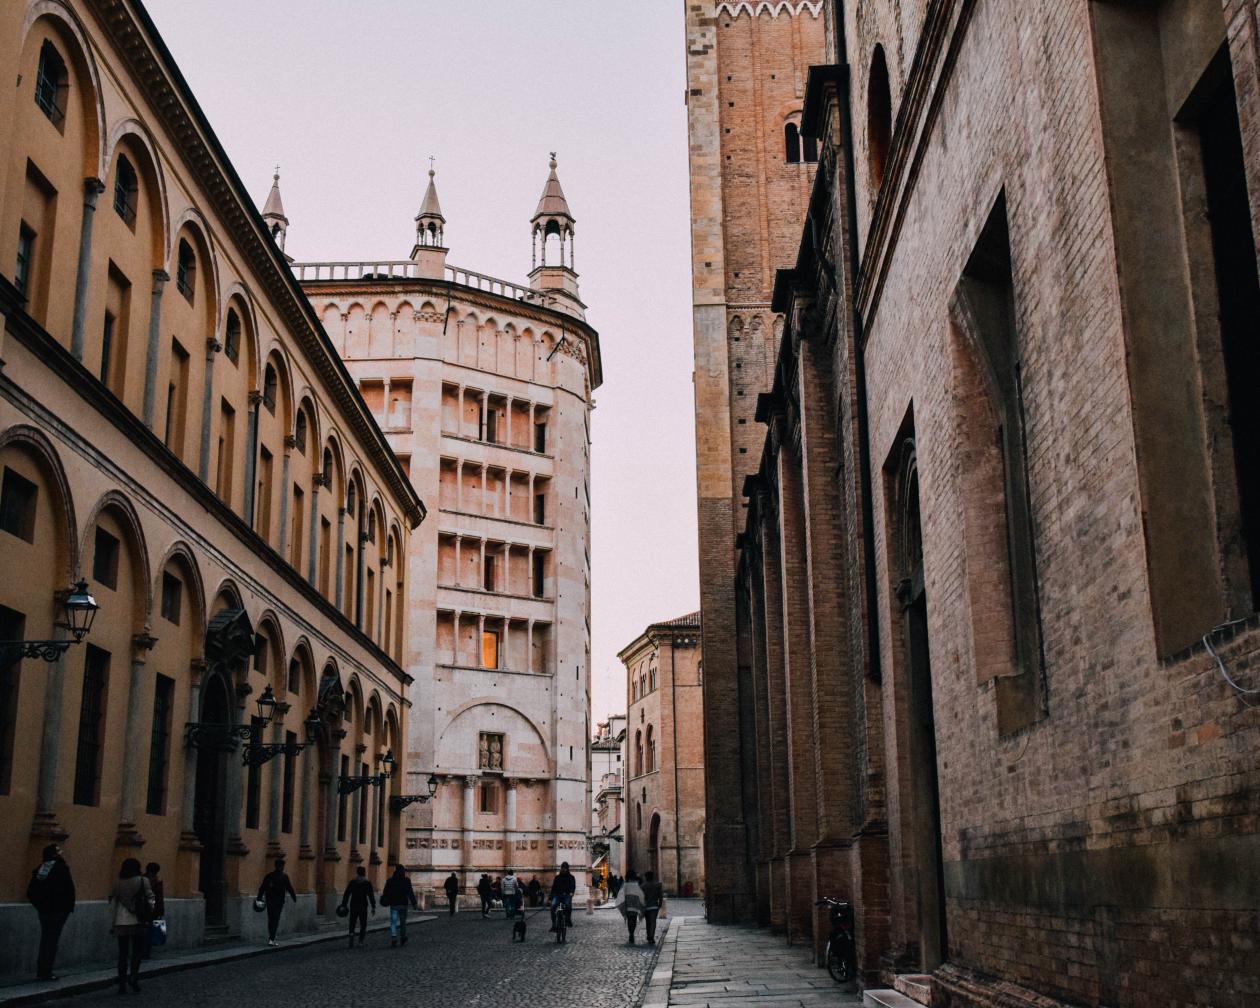 People walk in the historic center of Parma. The buildings are made of red brick and some have spires atop them.